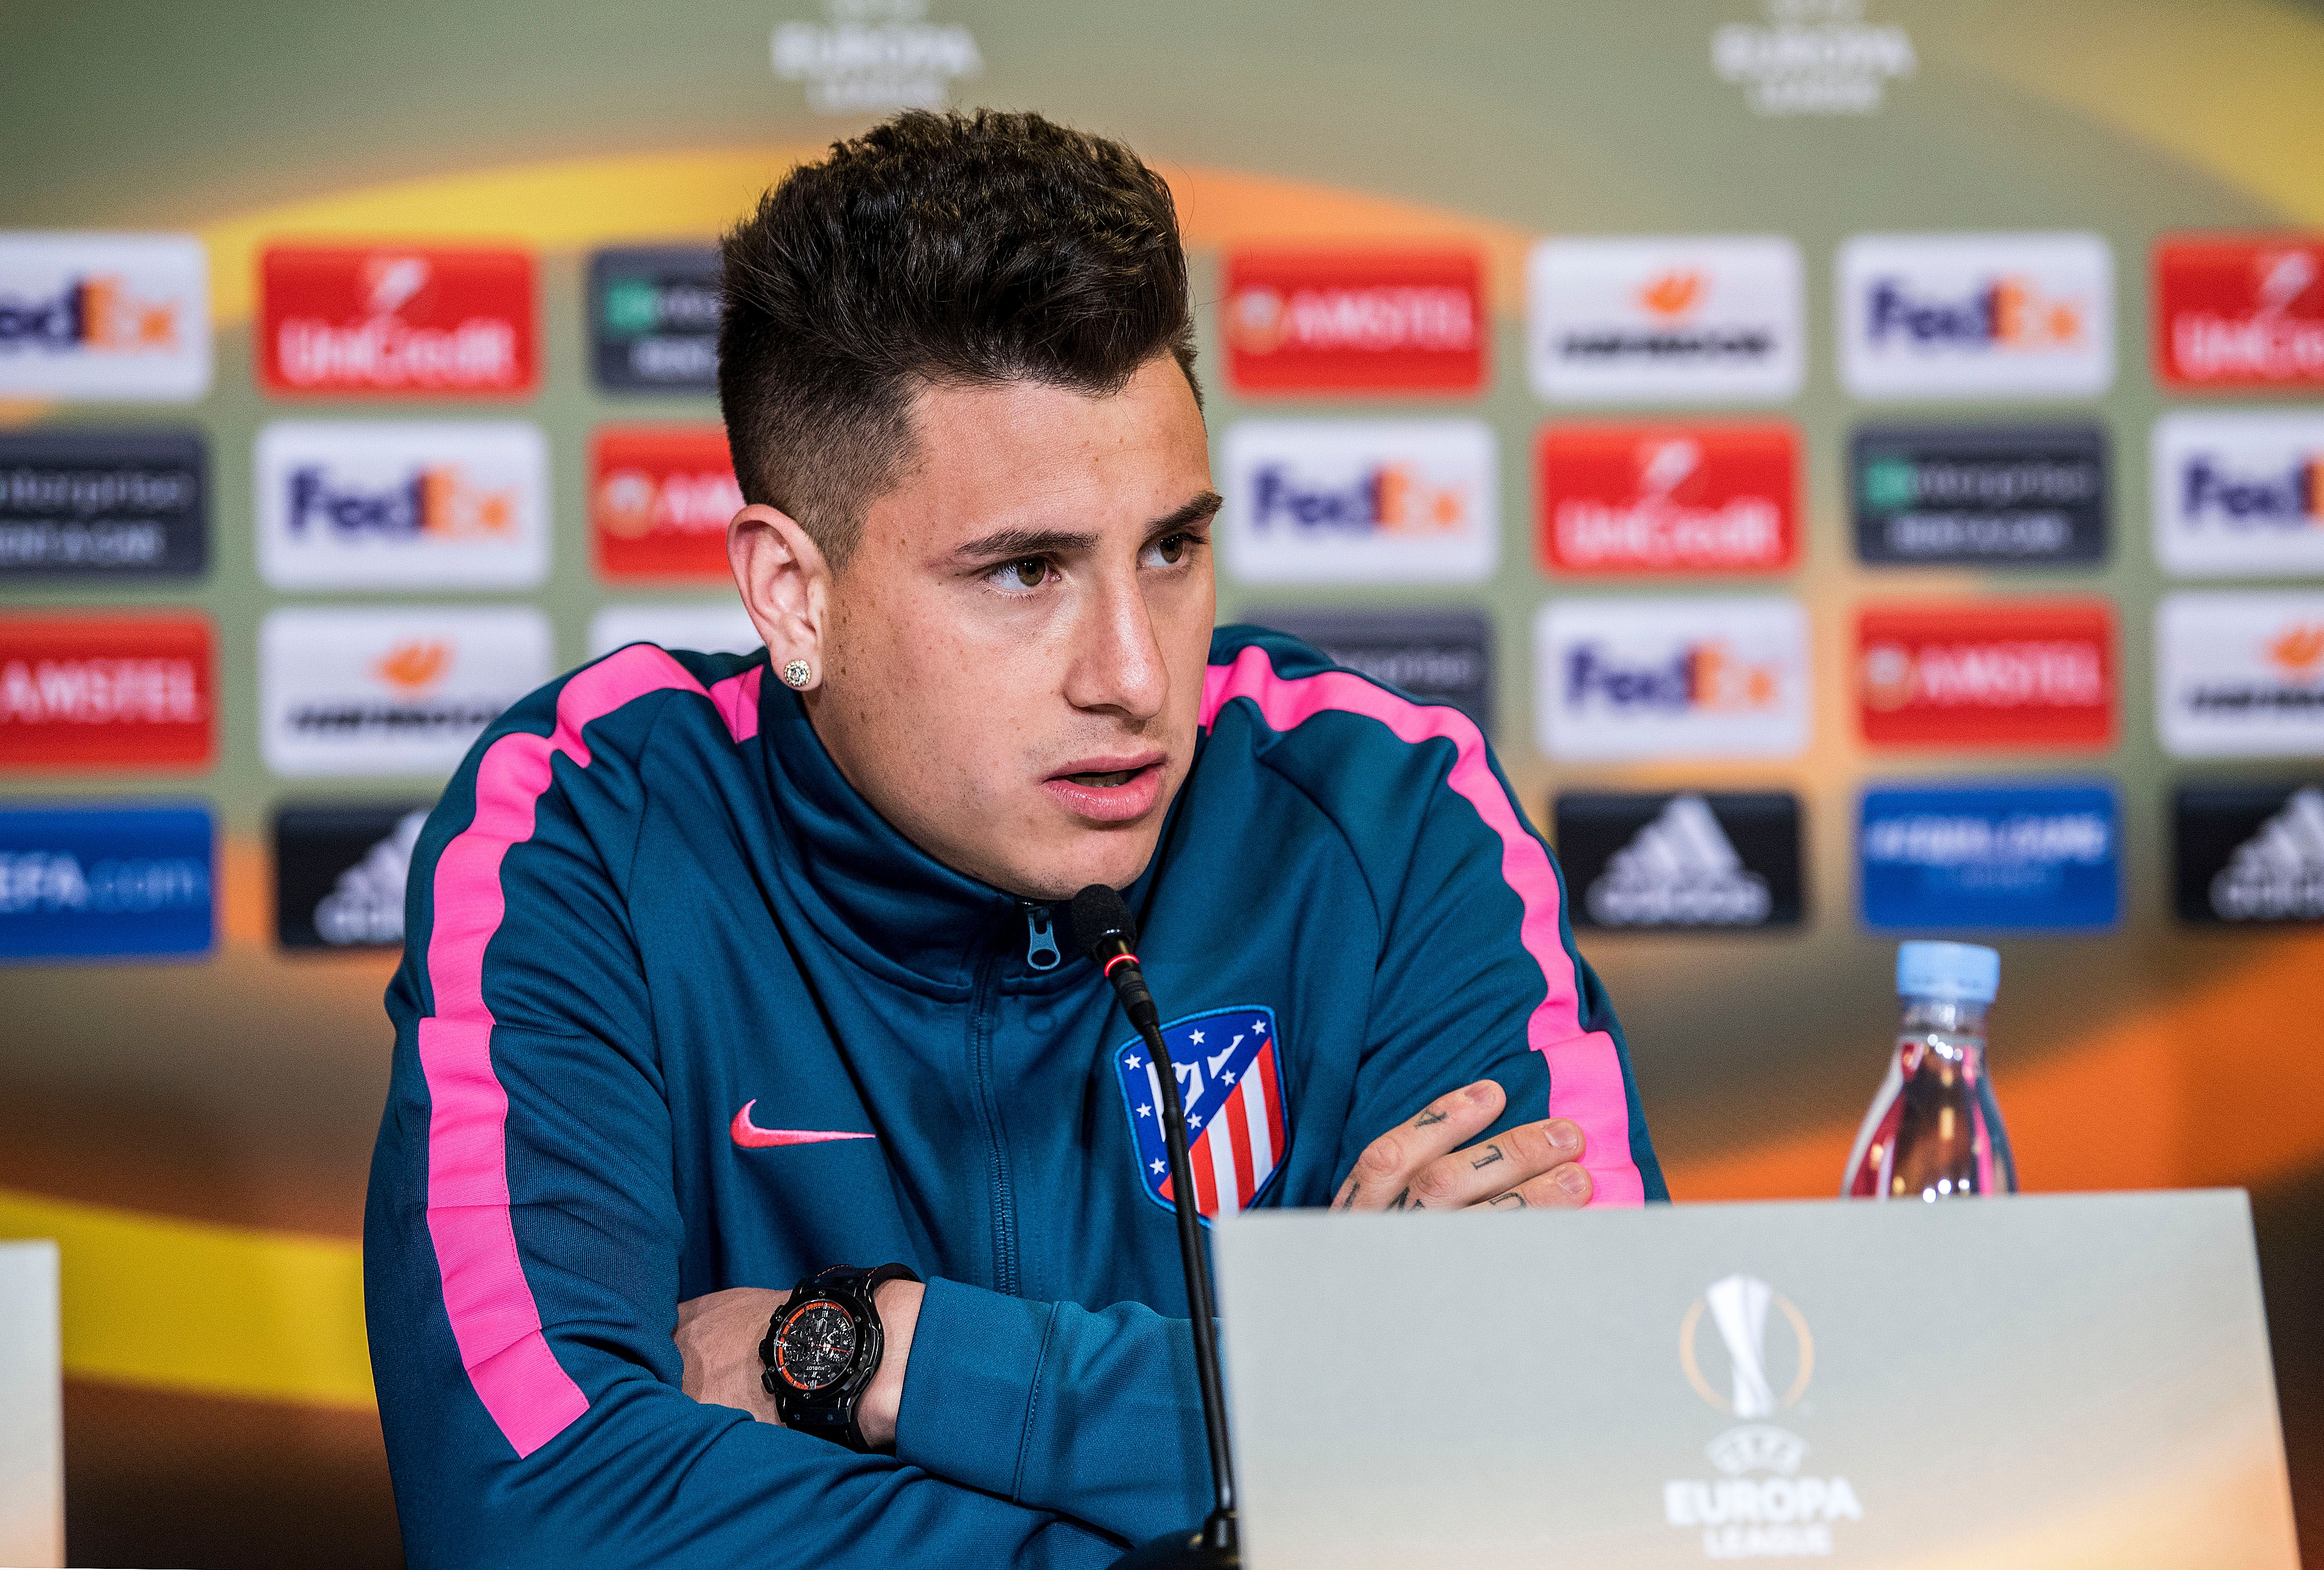 Atletico Madrid football club's Jose Gimenez speaks during a press conference on February 14, 2018 in Copenhagen, Denmark, on the eve of the UEFA Europa League round of 32 football match FC Copenhagen against Atletico Madrid.  / AFP PHOTO / SCANPIX DENMARK / Anders Kjaerbye / Denmark OUT        (Photo credit should read ANDERS KJAERBYE/AFP/Getty Images)